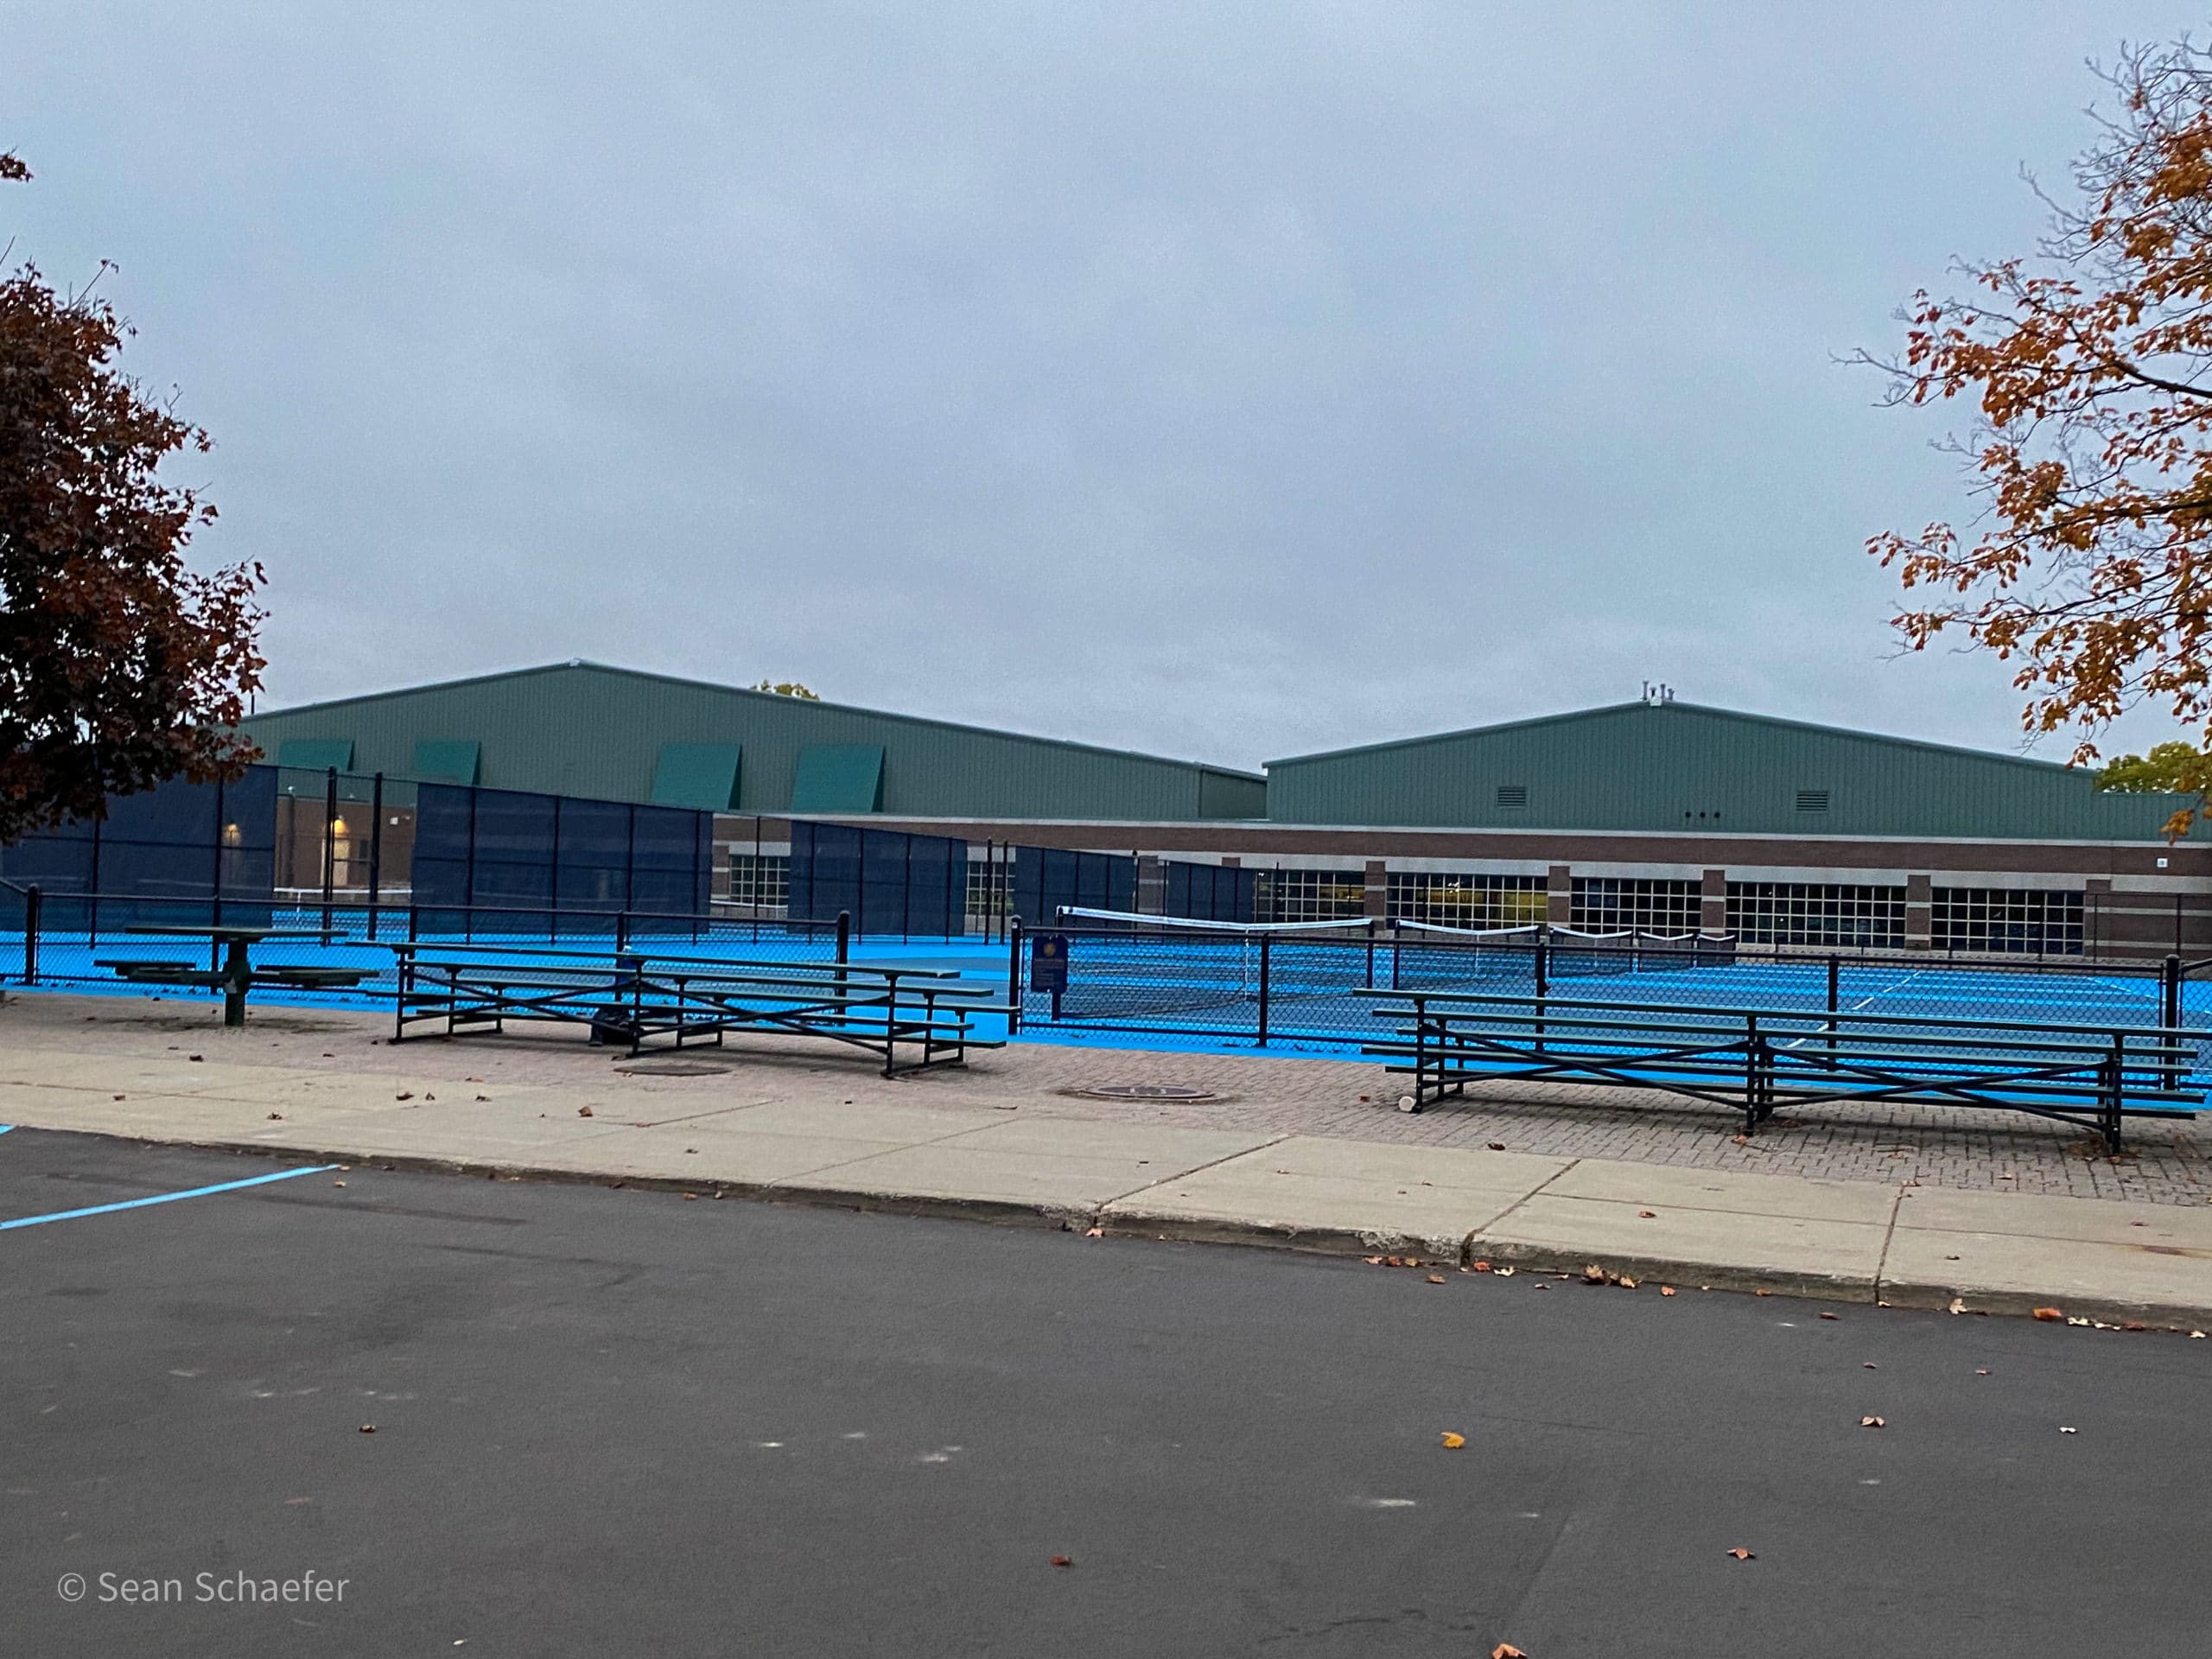 Image of commercial tennis courts with chain link fencing and posts at Detroit Country Day School